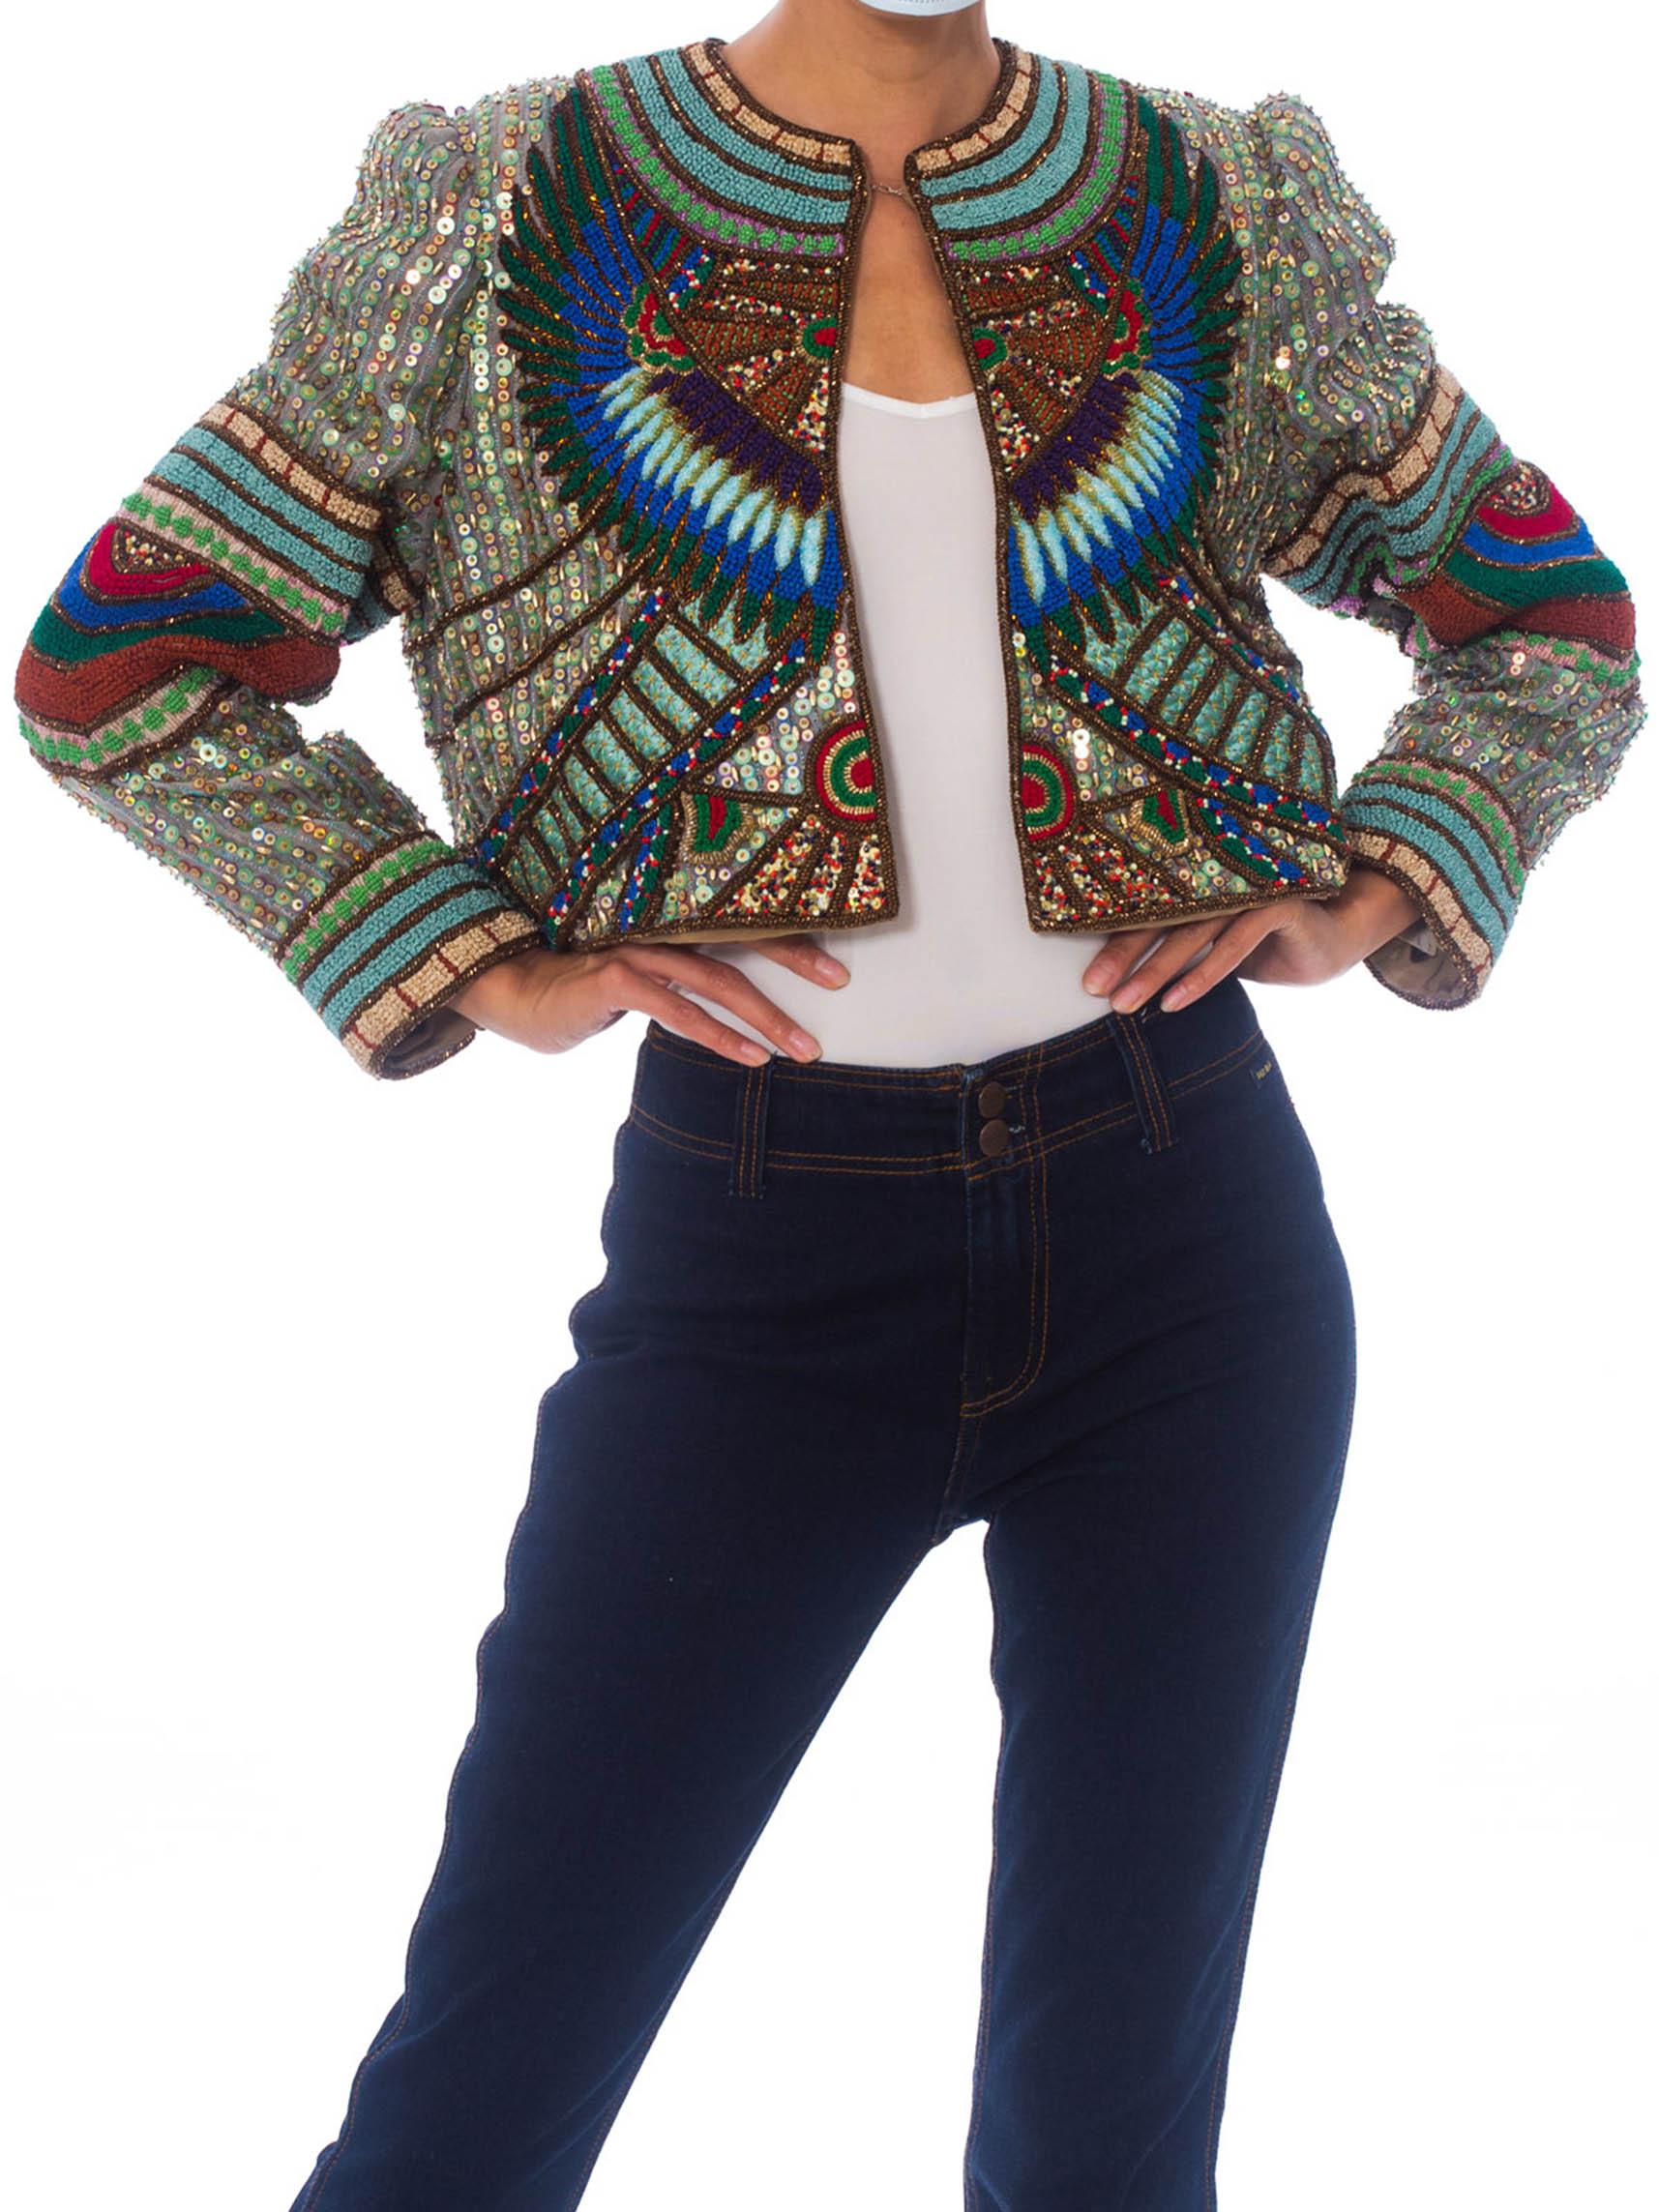 1980S RICHILENE Blue & Gold Silk Evening Jacket Entirely Beaded Embroidered With An Egyptian Wing Design